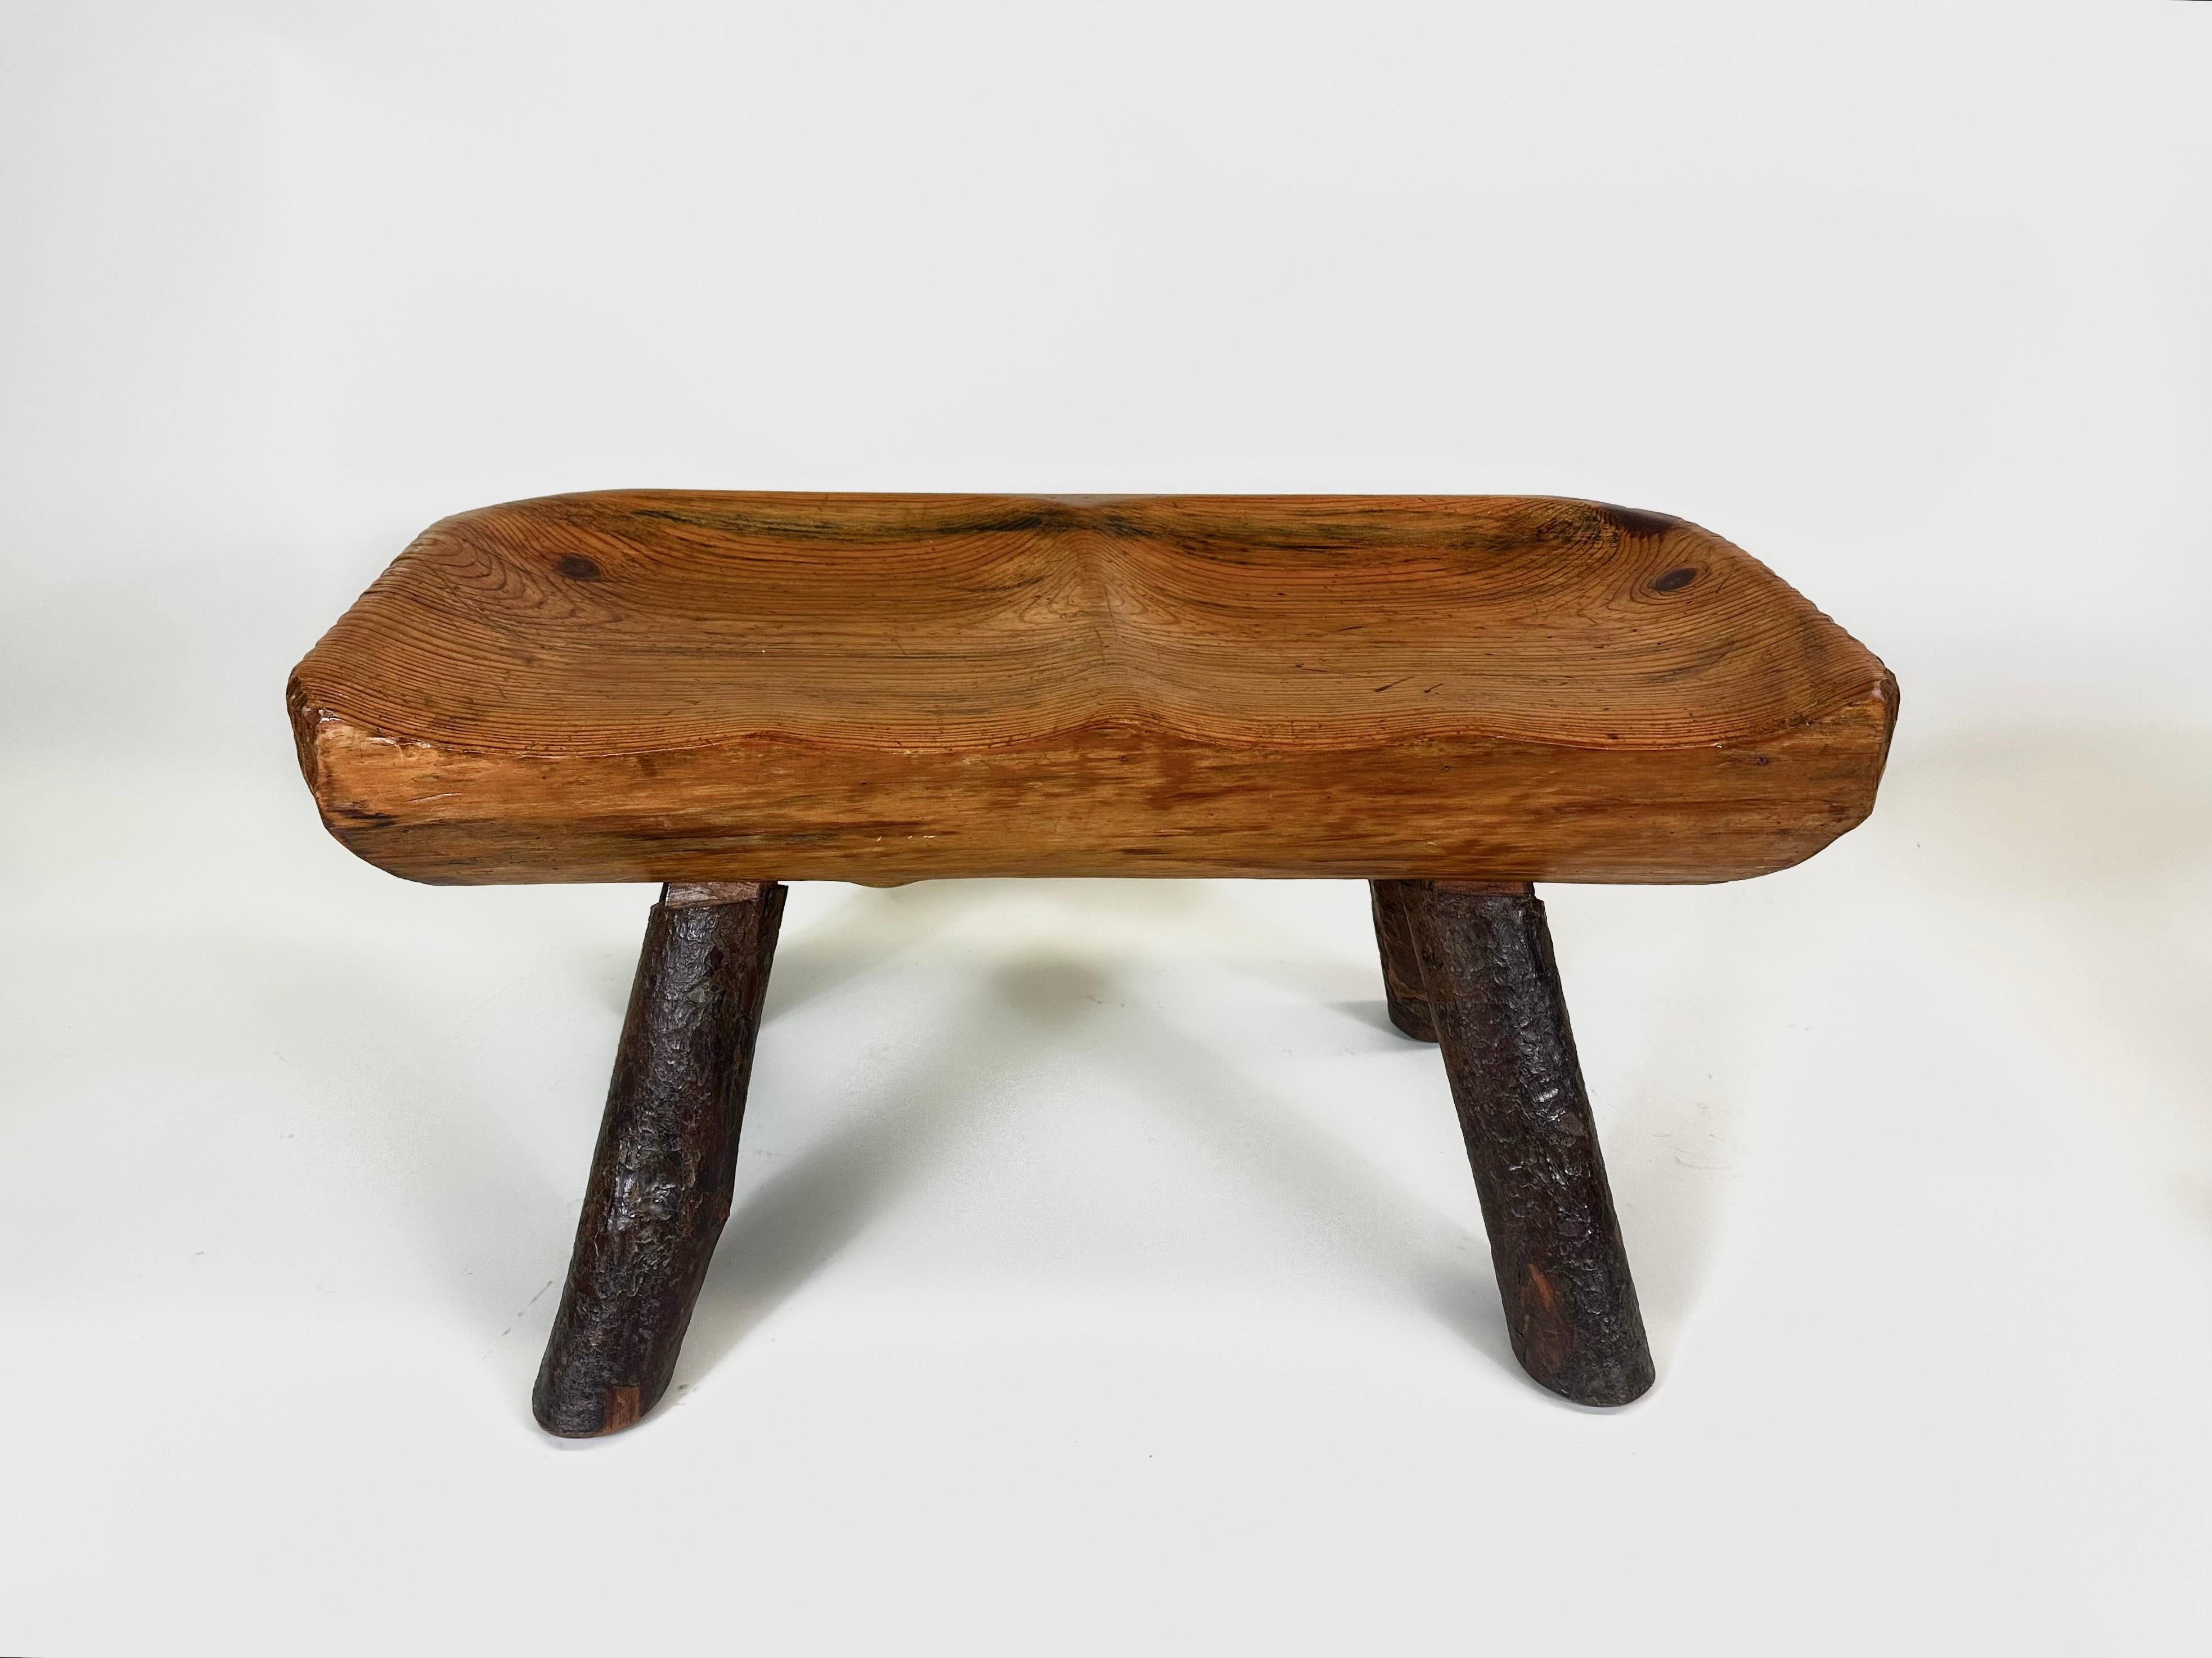 Wood 2 Rare Italian Modern Craftsman Alpine Benches in Hand Carved Cypress For Sale